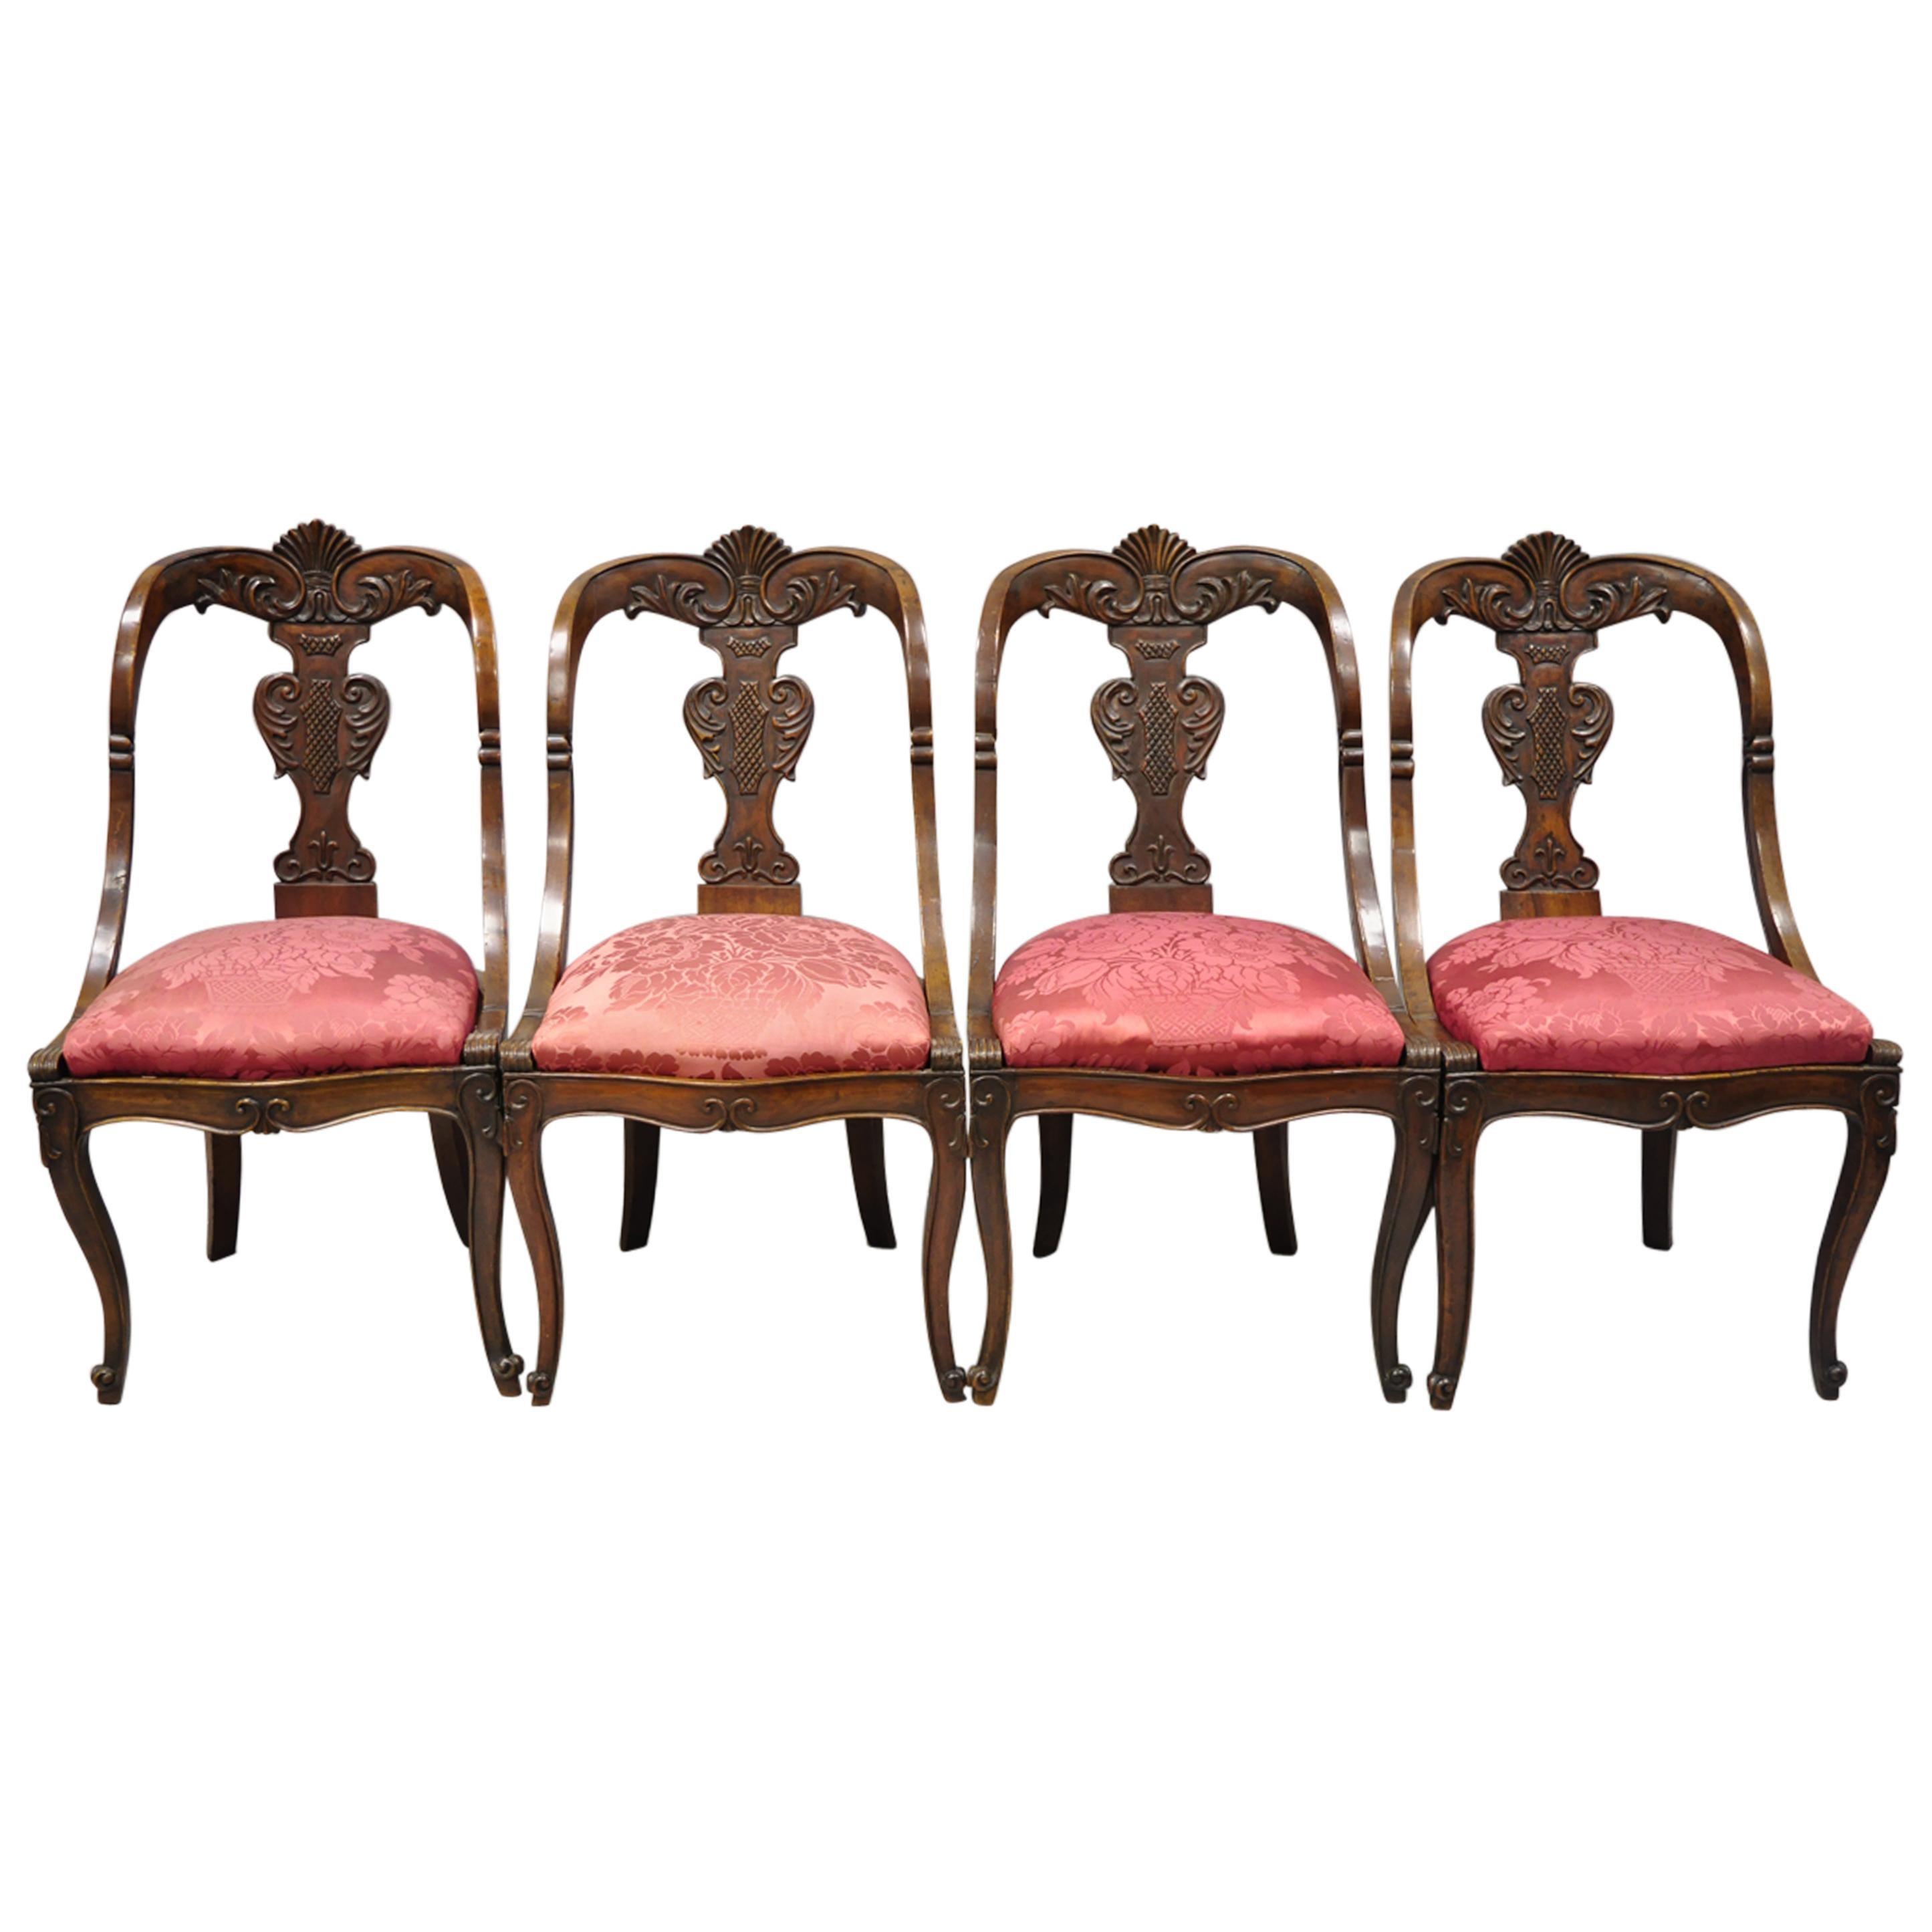 English Regency Carved Mahogany Curved Back Dining Side Chairs, Set of 4